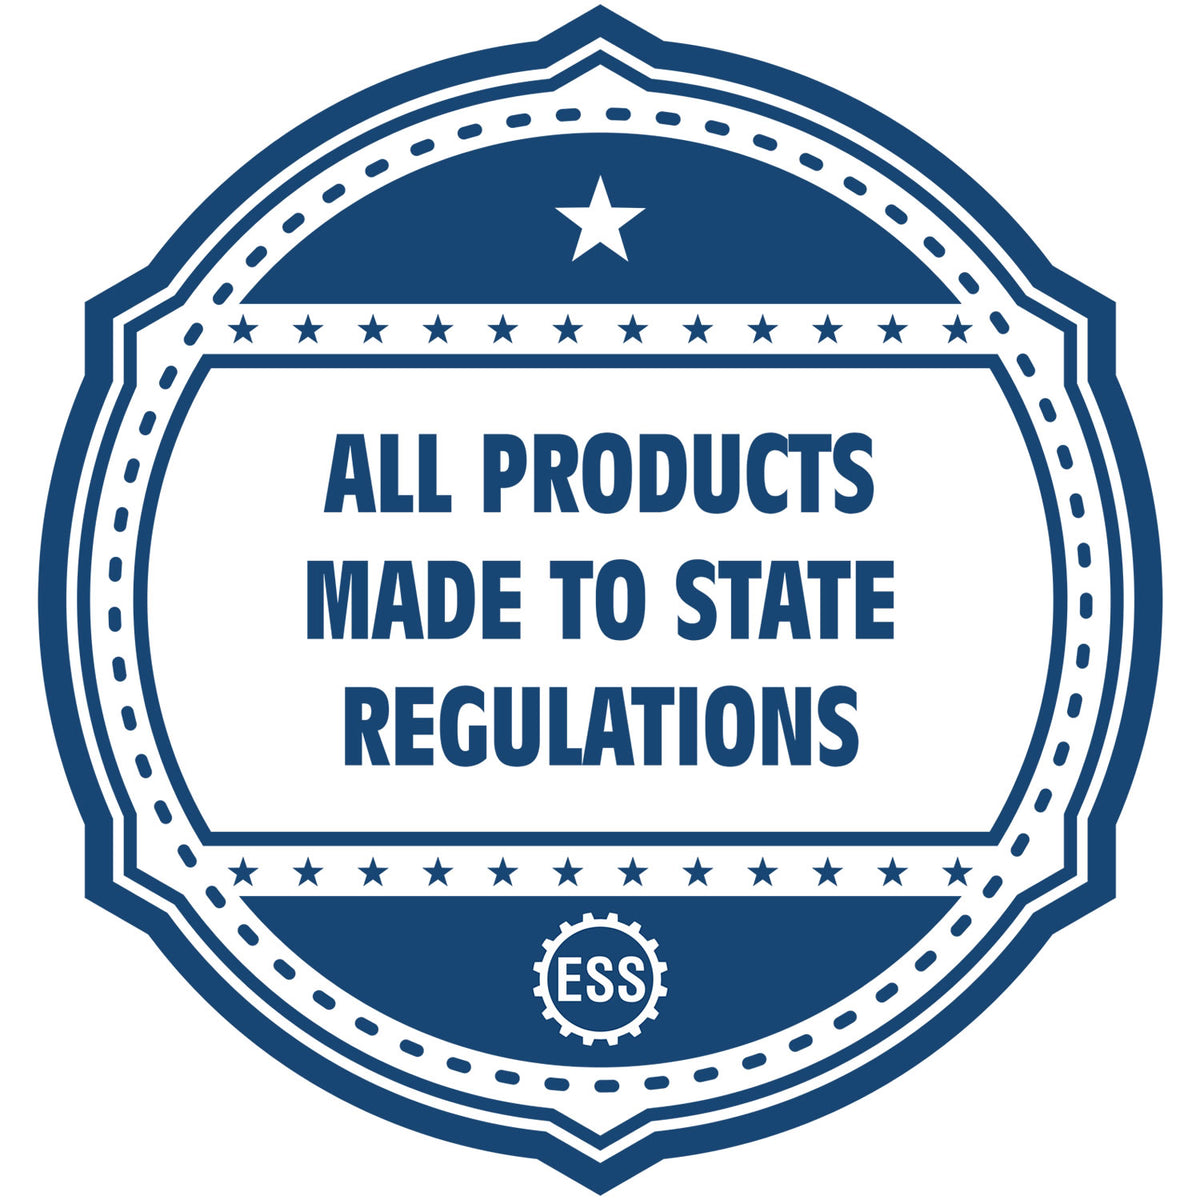 An icon or badge element for the Wooden Handle Vermont State Seal Notary Public Stamp showing that this product is made in compliance with state regulations.